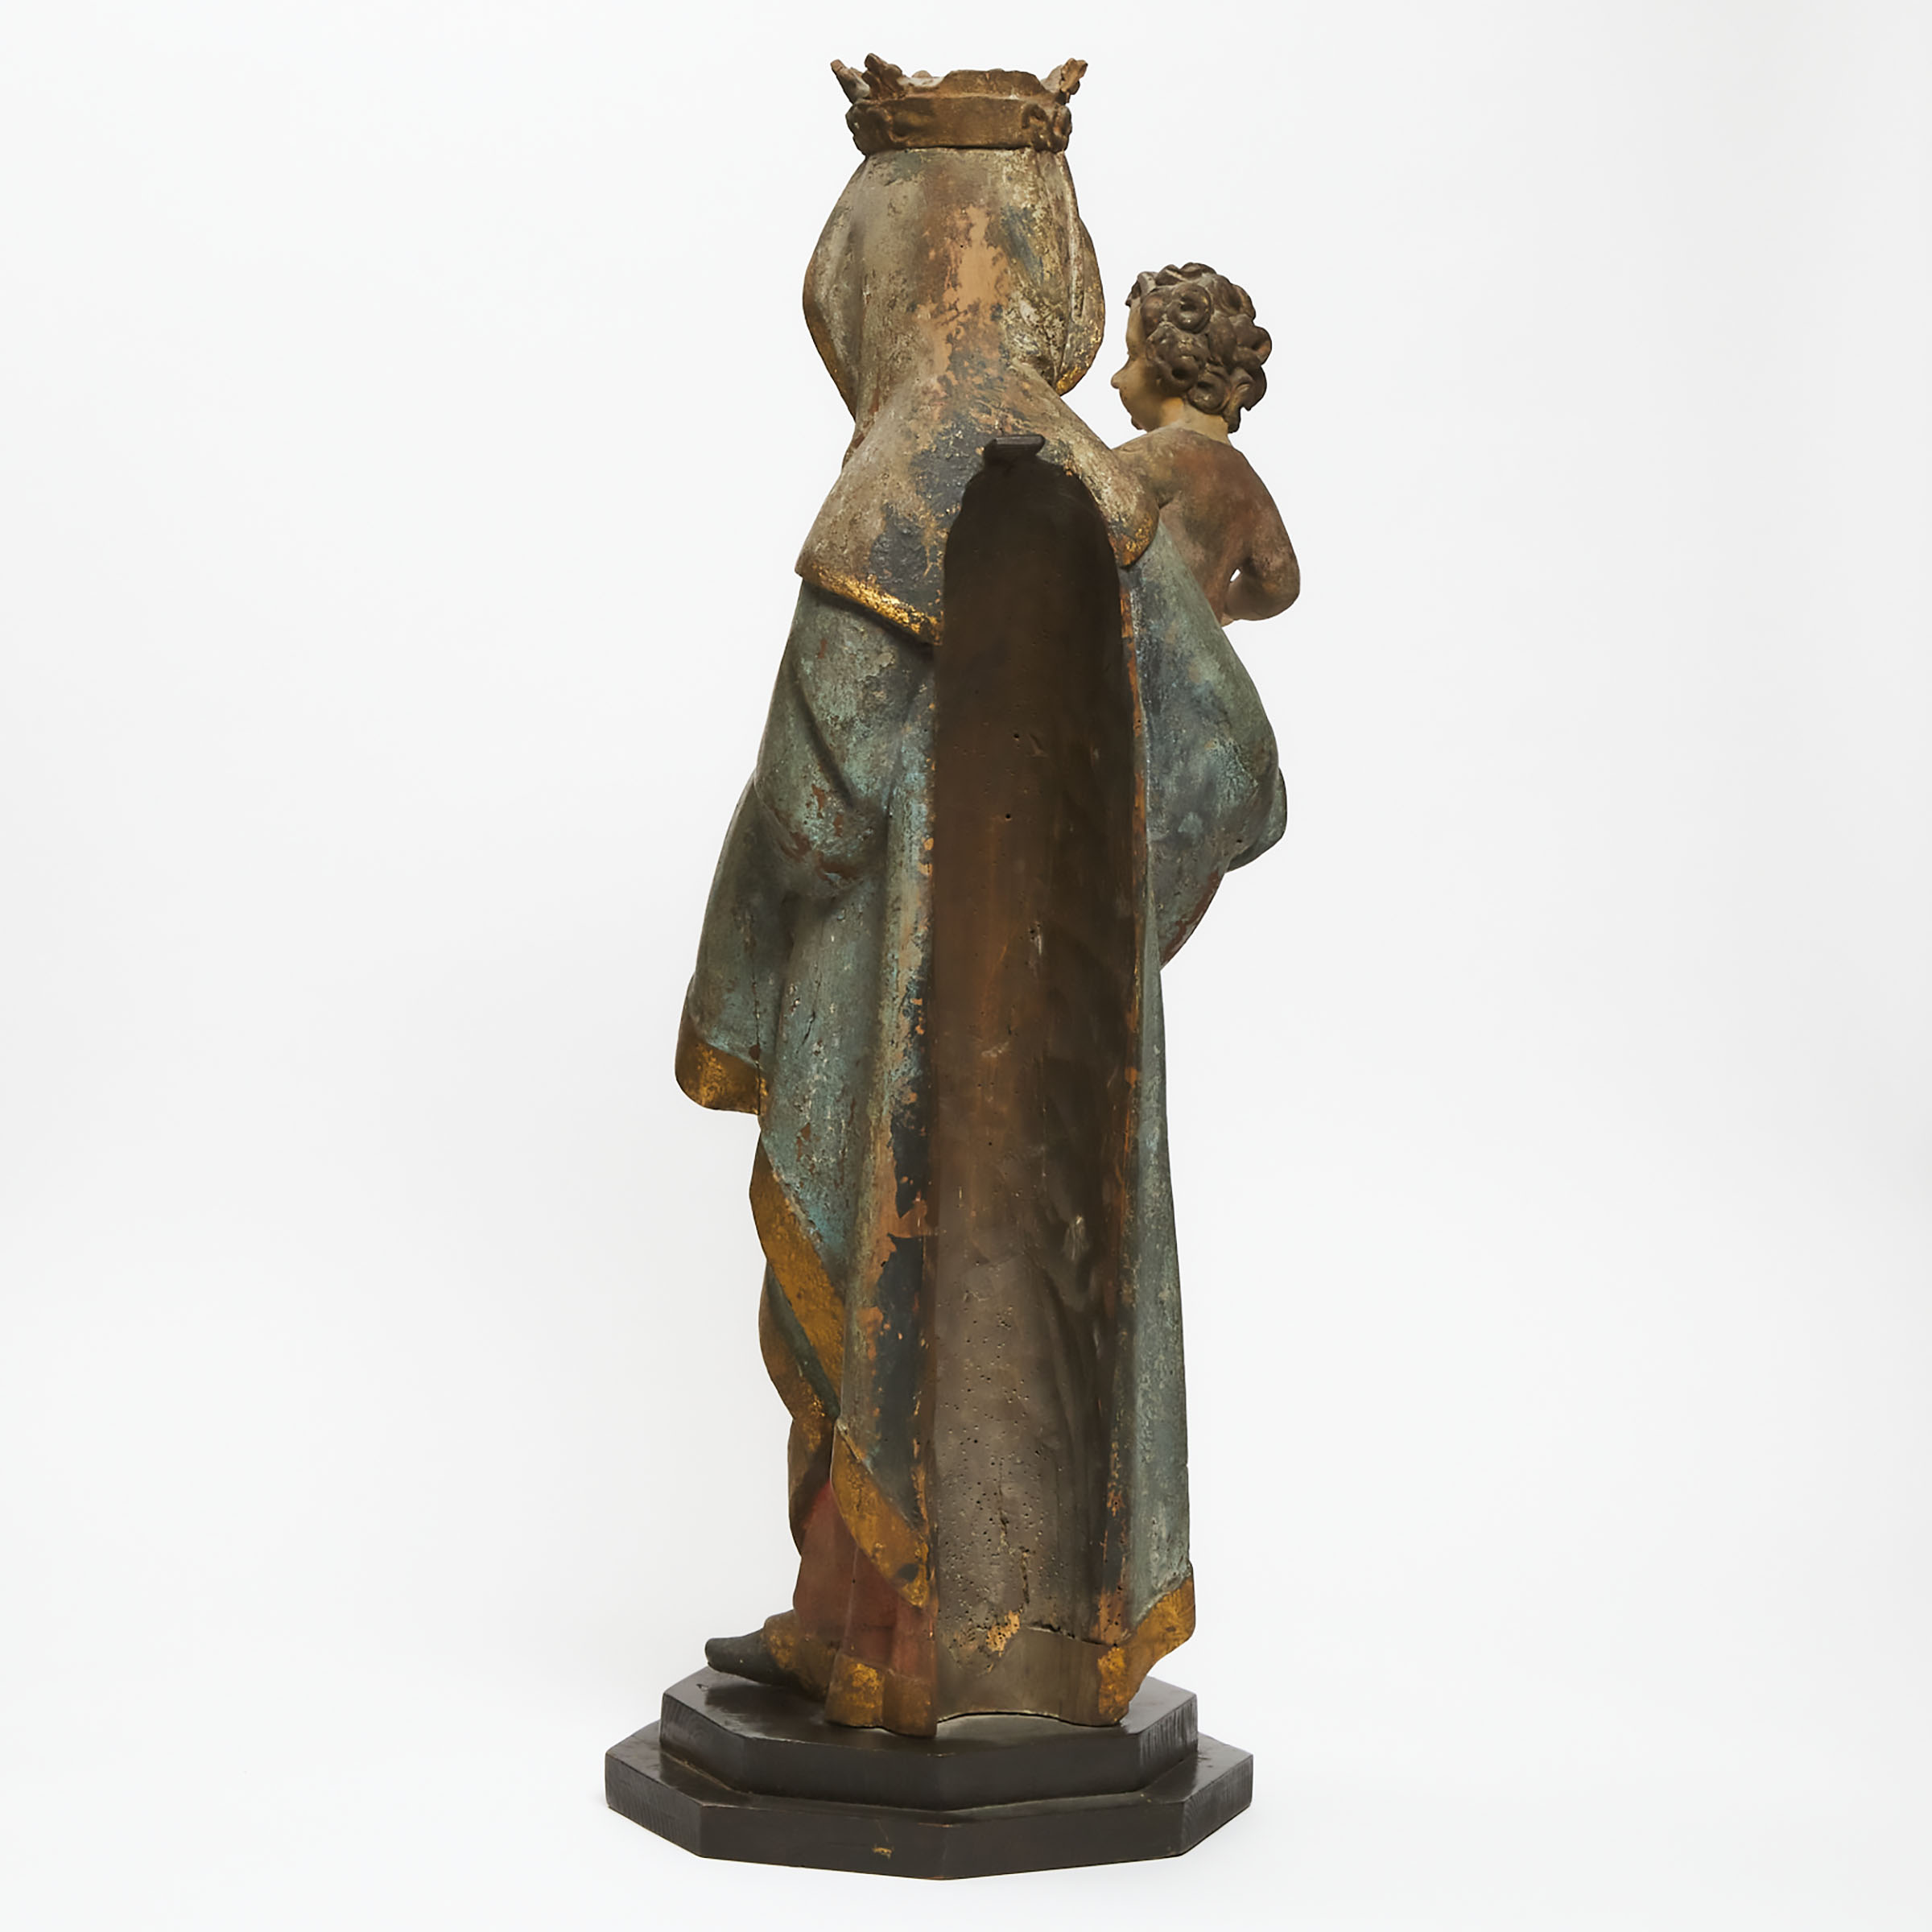 South German Baroque Carved, Polychromed and Parcel Gilt Group of the Madonna and Child, 17th century or earlier